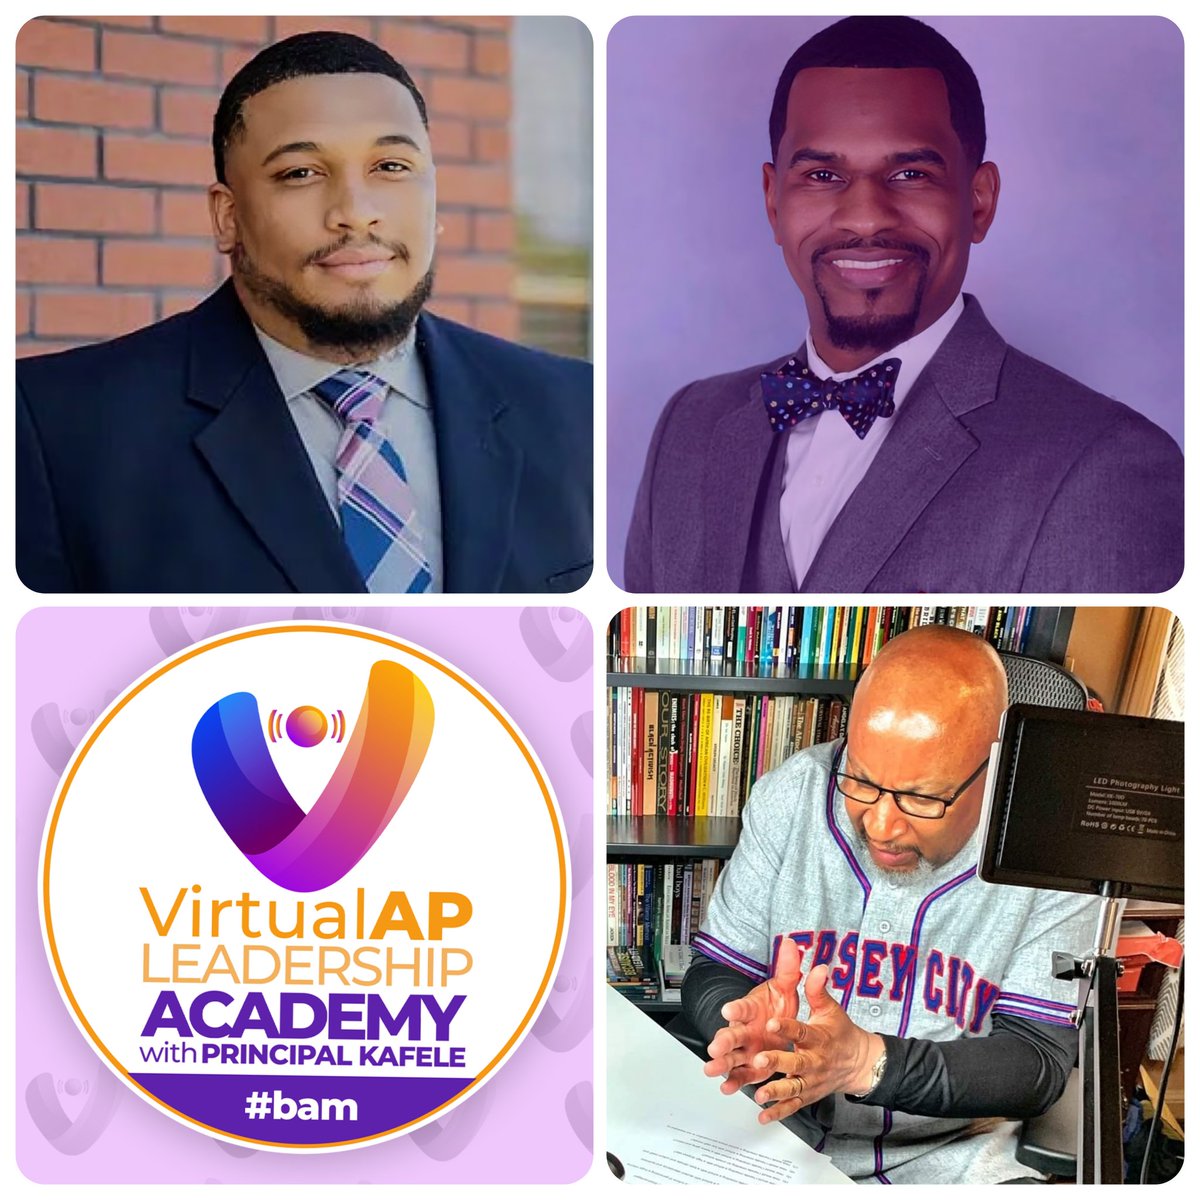 WEEK 163 IS UPON US....and I've got two esteemed school leaders joining me to chop it up on leadership summer preparation. Join Dr. Dionel Waters, @KwameSimmons1 and I @ 10:55 ET this Sat morn right here LIVE or YouTube LIVE @ Virtual AP Leadership Academy. Bring a colleague!